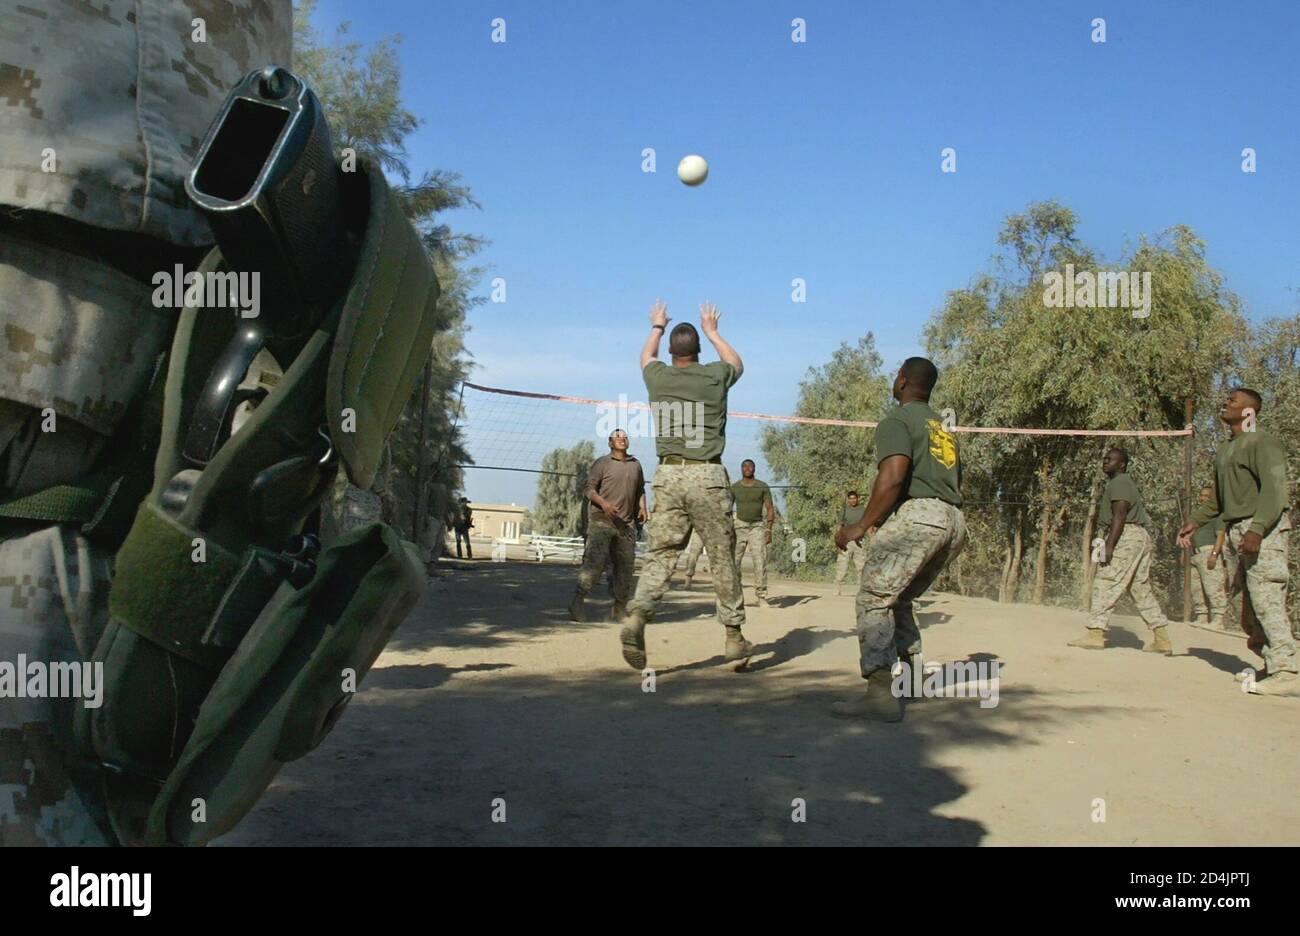 U.S Marines from 31st Marine Expeditionary Unit play volleyball in their camp near the restive town of Falluja, 50 kms west of Baghdad December 10, 2004. REUTERS/Shamil Zhumatov  SZH/WS Stock Photo